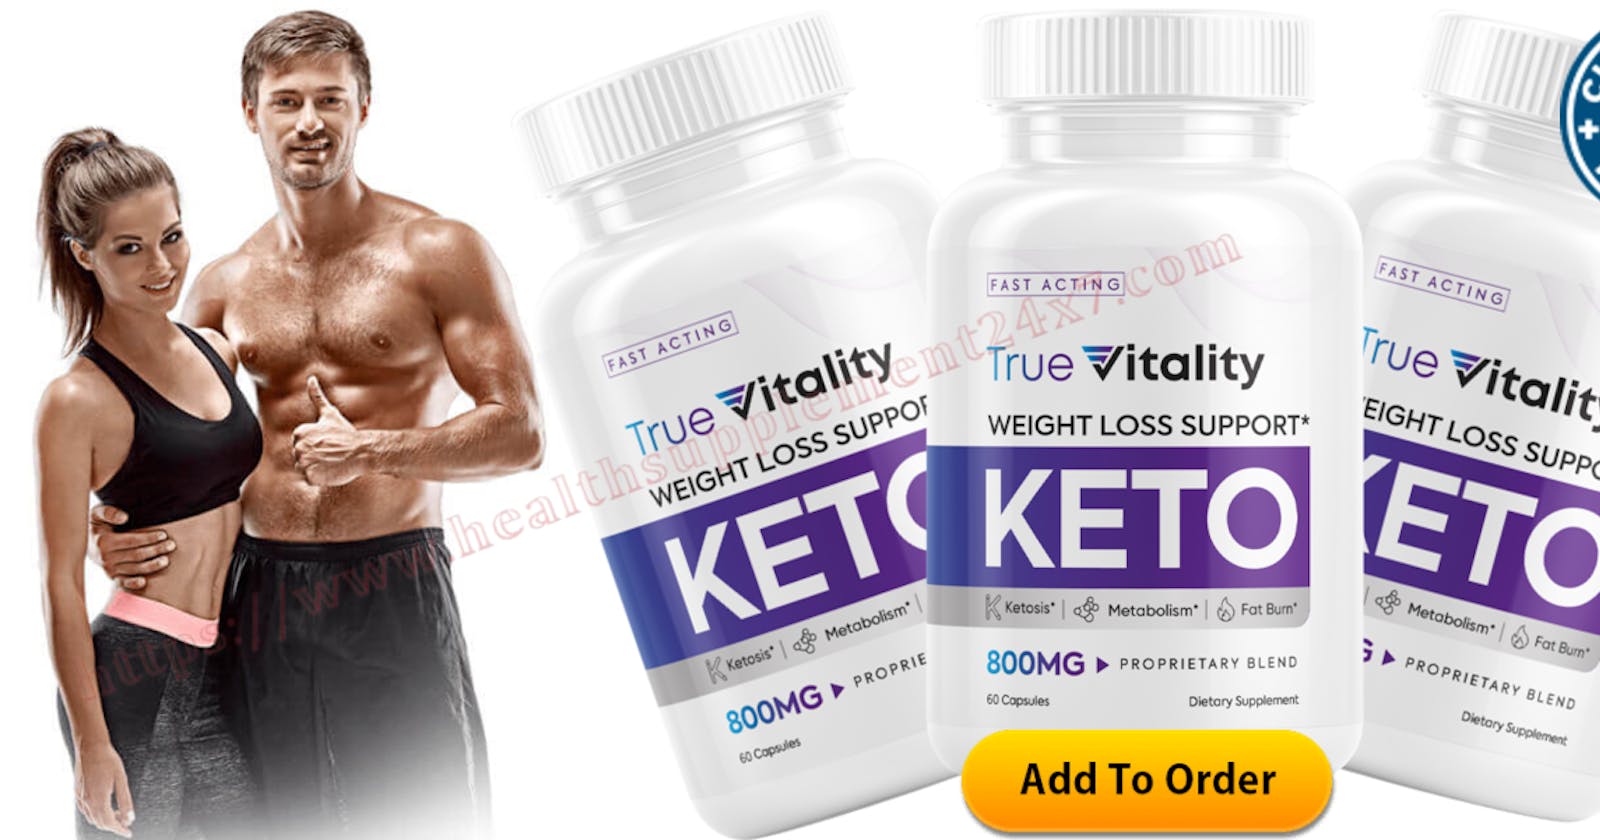 True Vitality Keto (Clinically Proven) Powerful Formula To Reduce Your Body Weight And Fat Loss(Spam Or Legit)